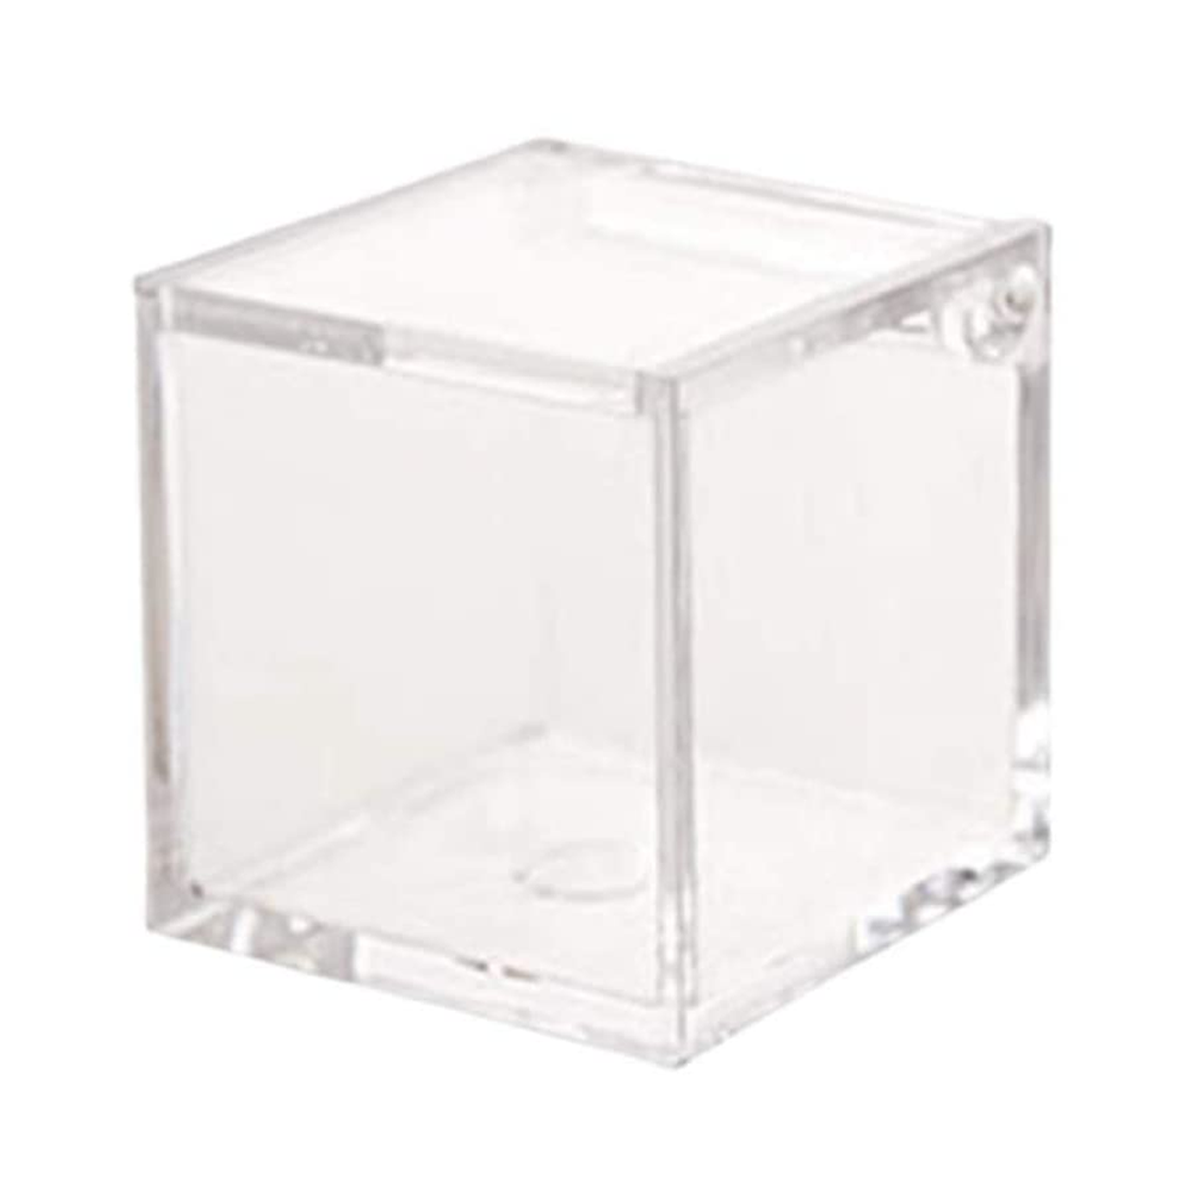 Clear Acrylic Storage Box with Hinged Lid - 8 x 8 x 8 Cms (12 Pcs Pack)